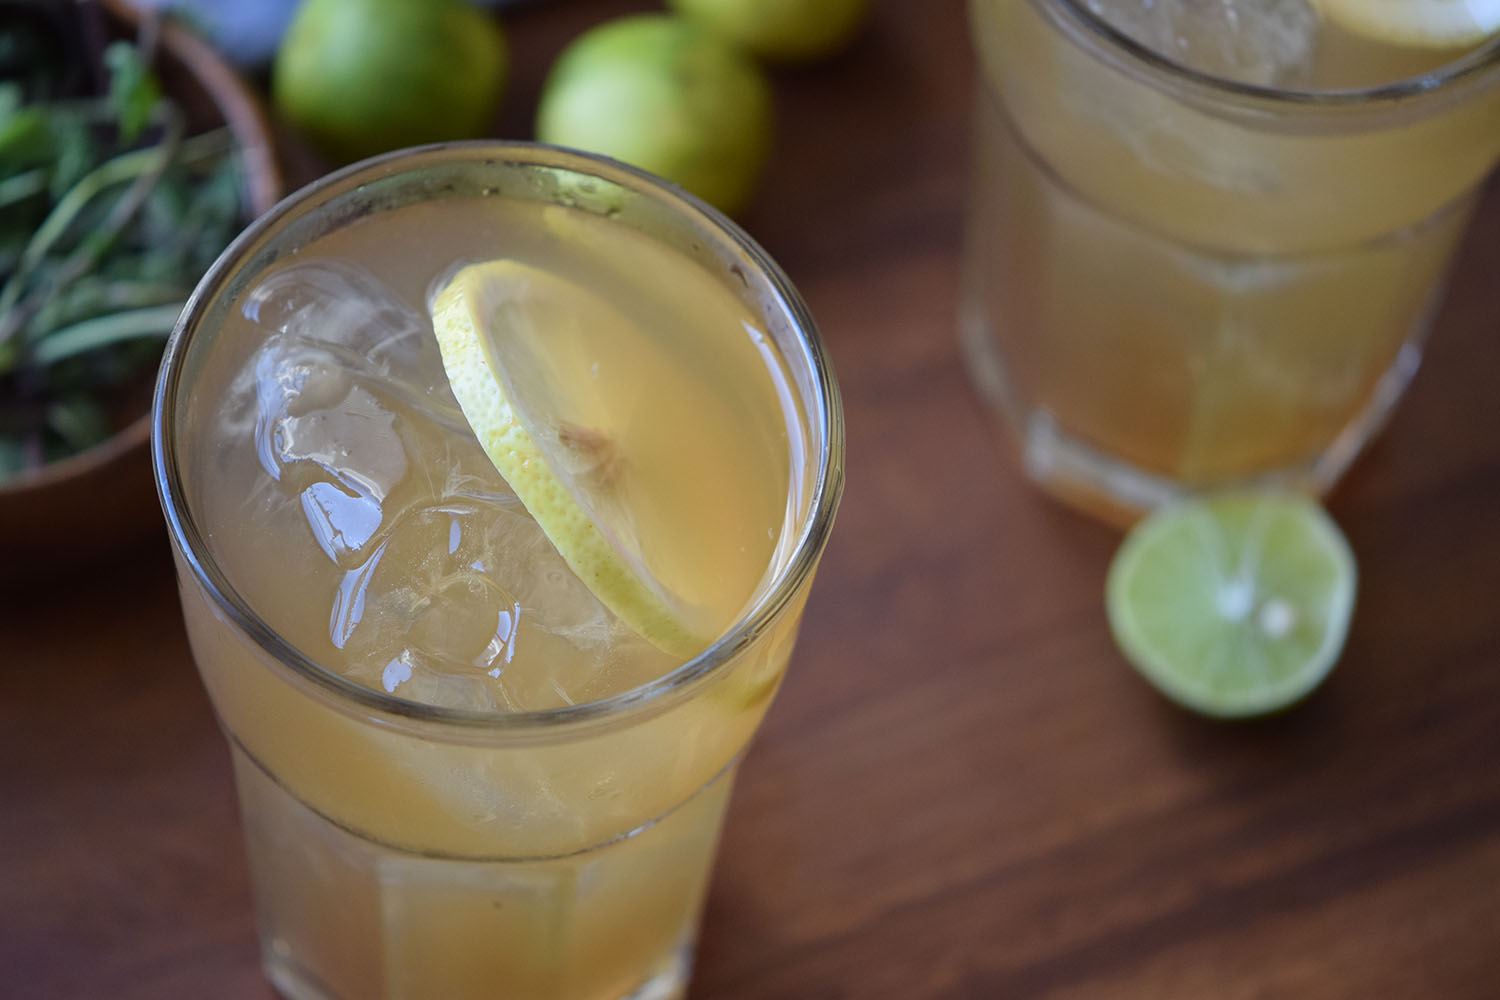 Dark and Stormy Cocktail Recipe